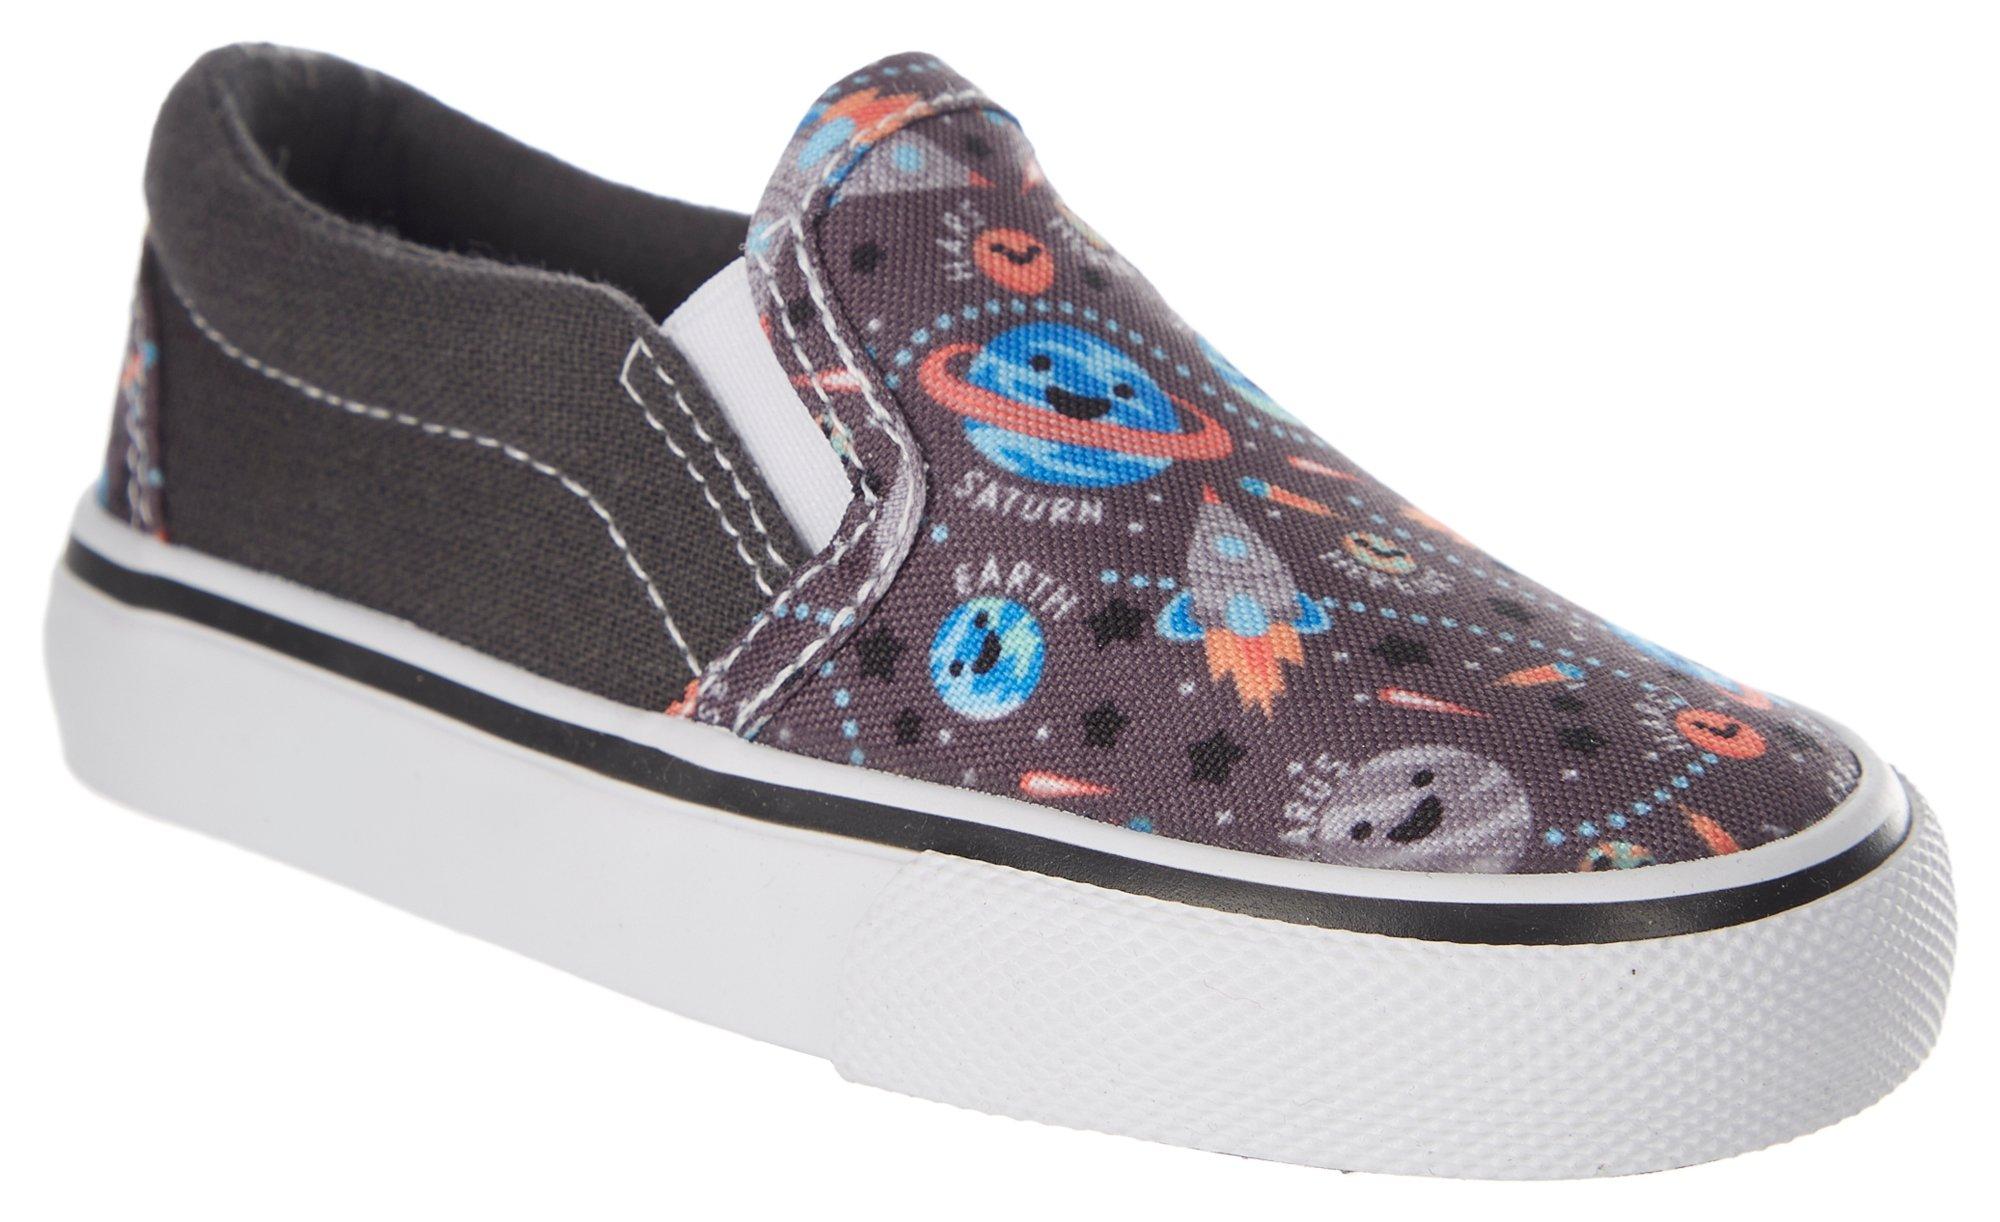 Toddler Boys Canvas Slip On Space